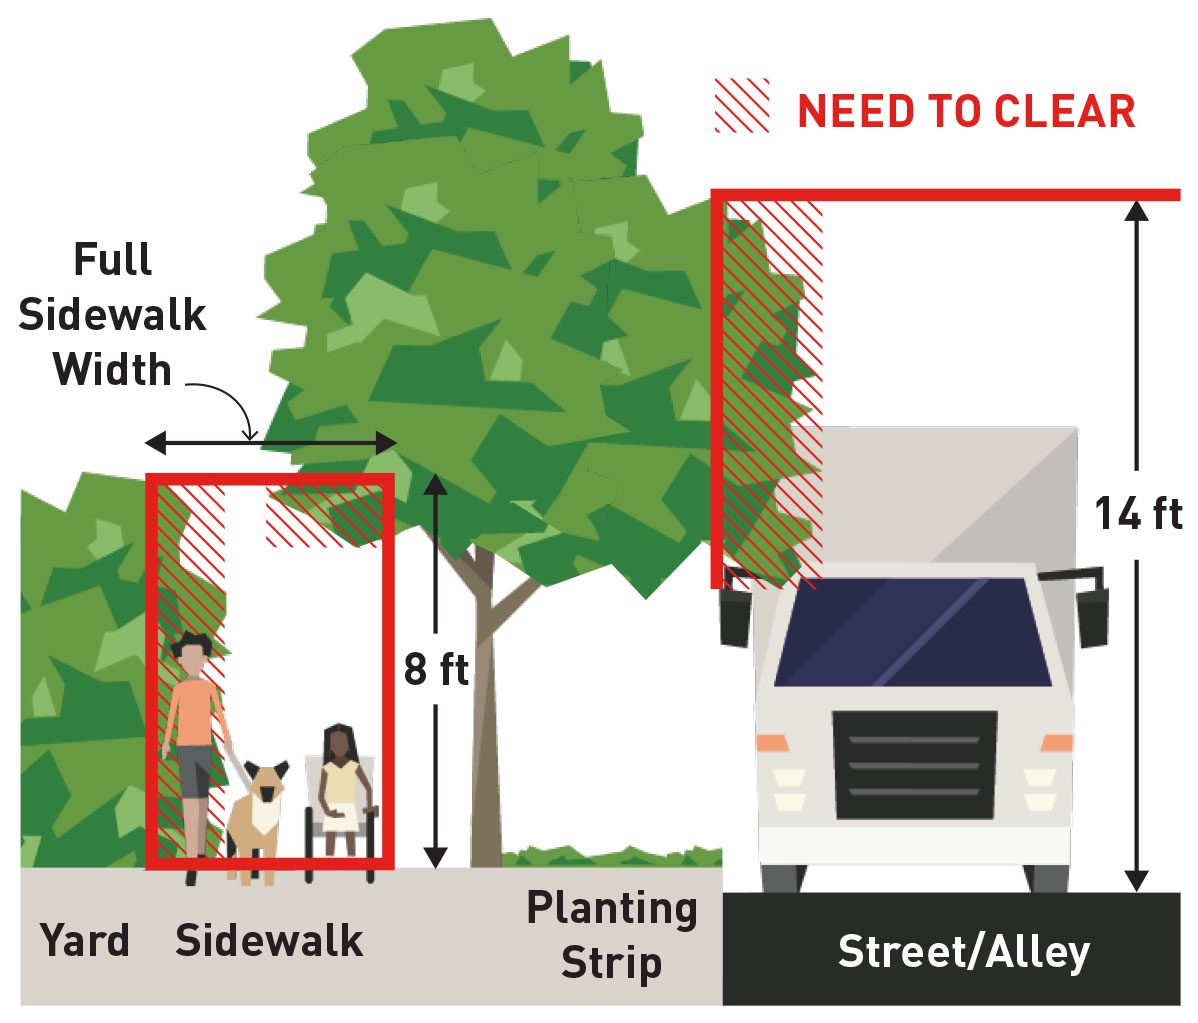 Graphic showing the locations where residents and business owners need to keep sidewalks clear of vegetation. The graphic shows a large shrub and large tree, with red outlining to show where the tree and vegetation need to be cleared, including an 8 foot clearance over the sidewalk and 14 foot clearance over any streets or alleys.